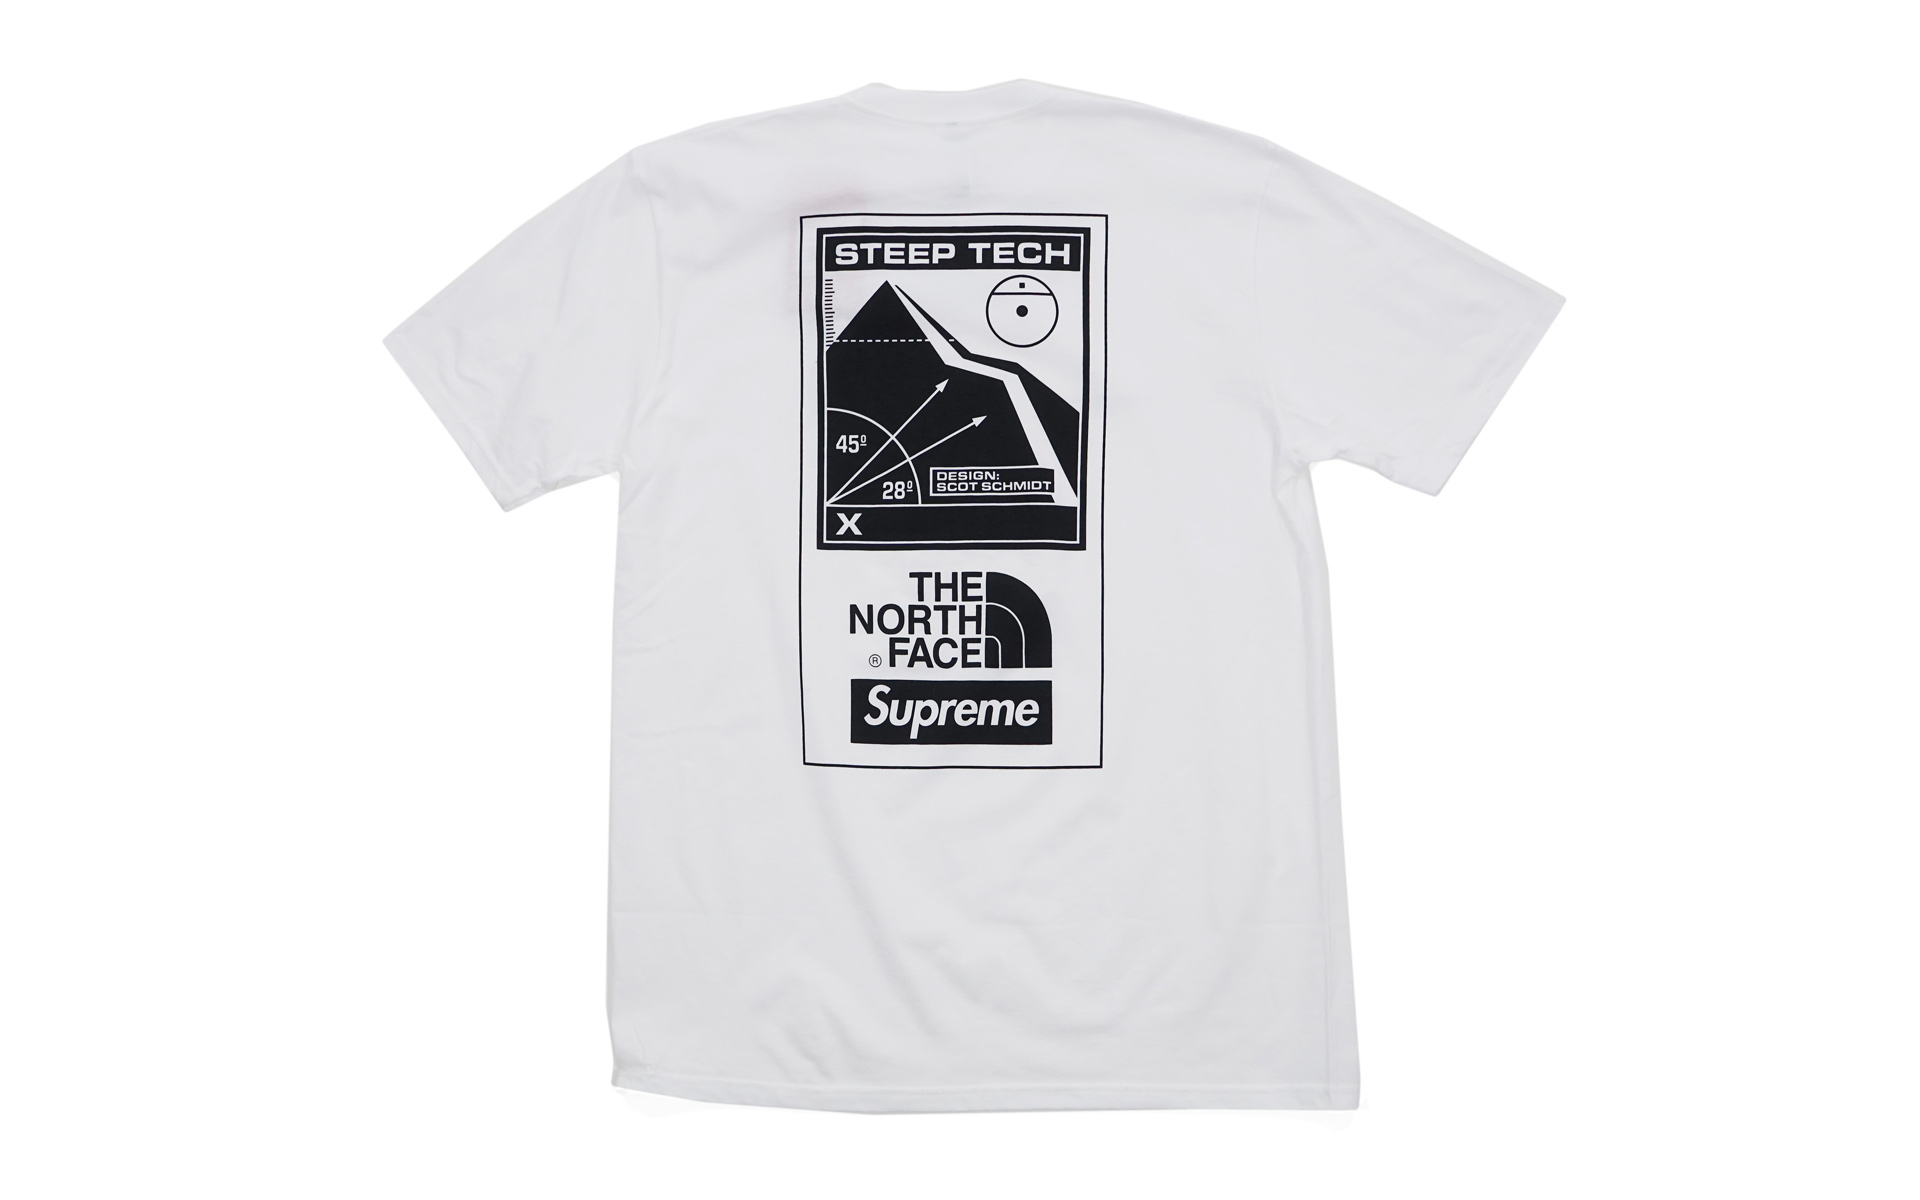 Supreme The North Face Steep Tech Tee White Men's - SS16 - US